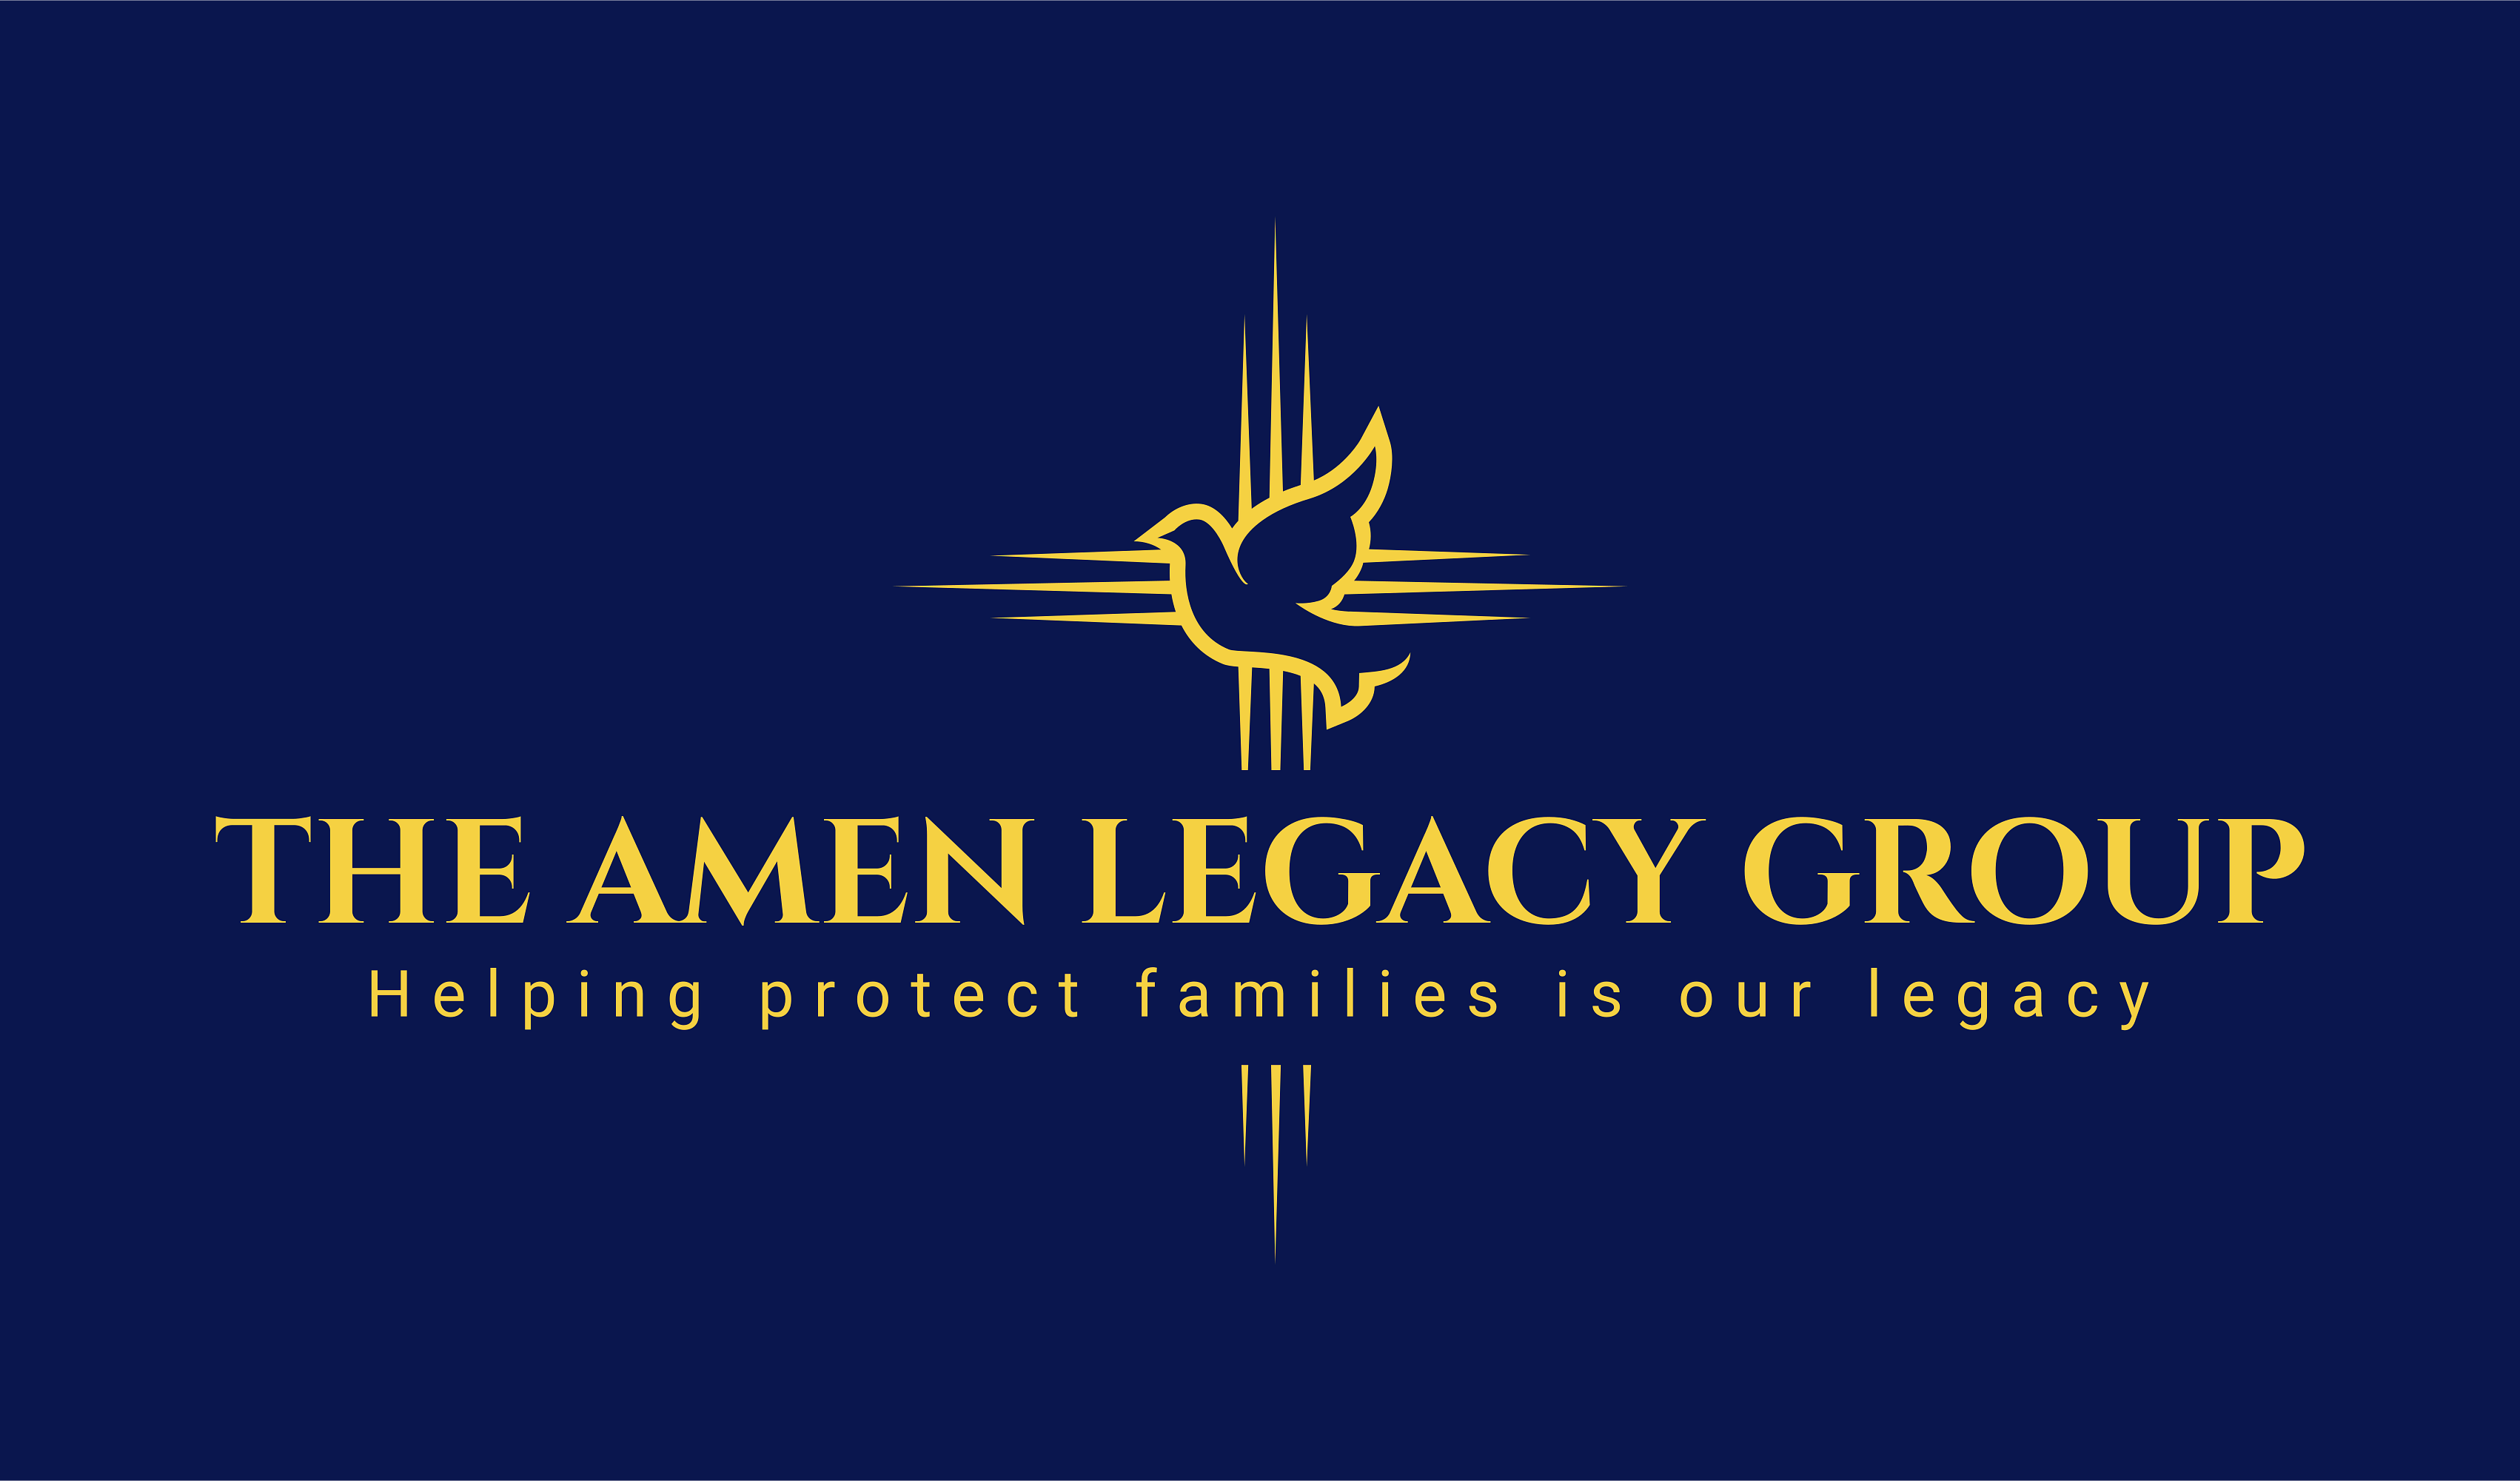 The A Men Legacy Group culture